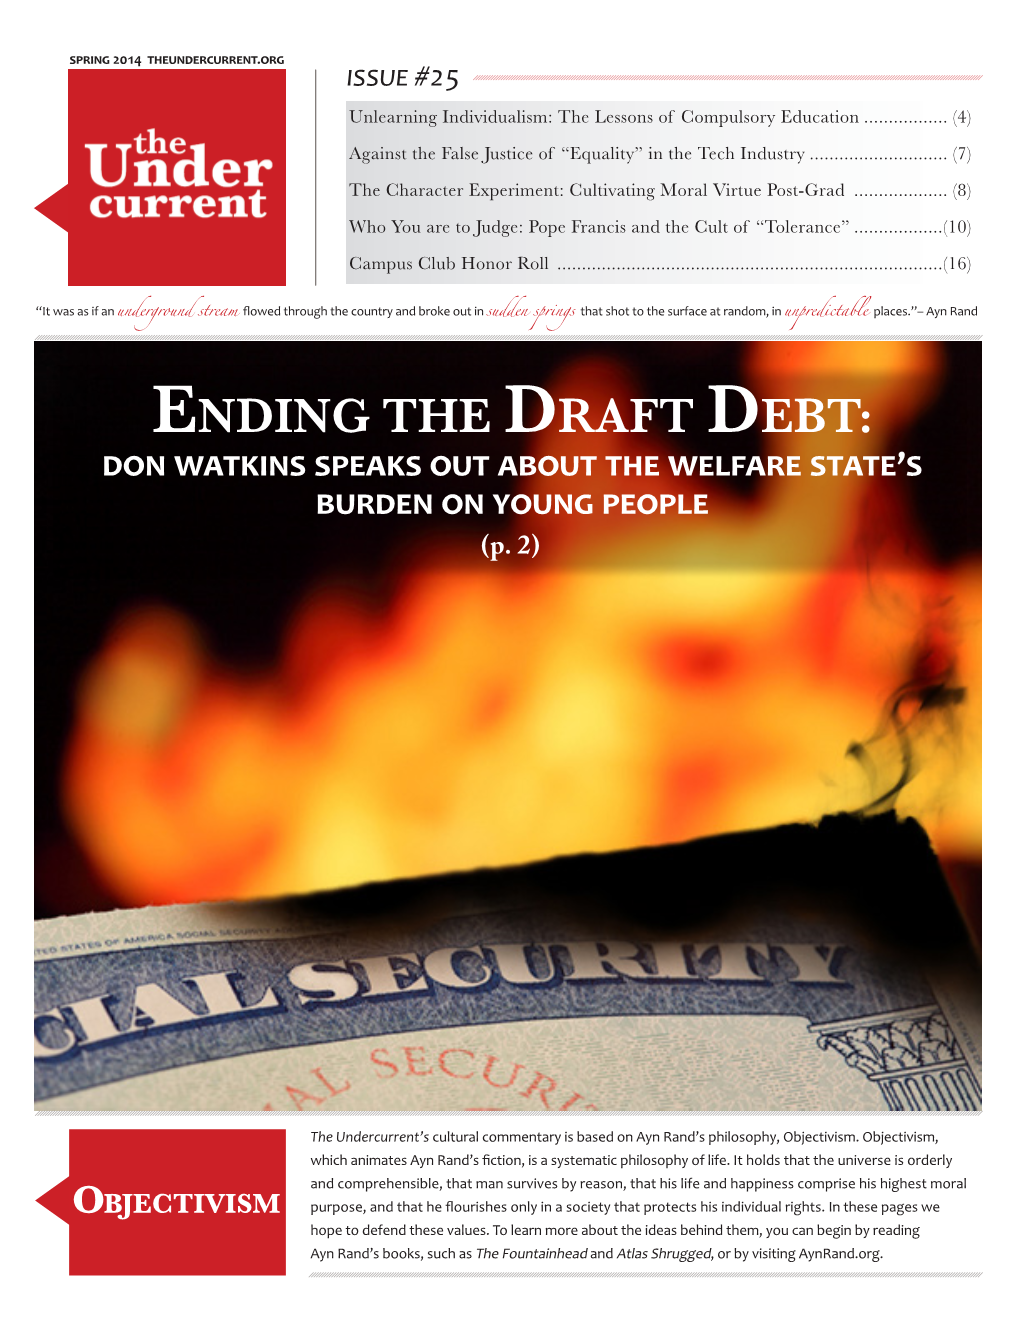 ENDING the DRAFT DEBT: Don Watkins Speaks out About the Welfare State’S Burden on Young People (P